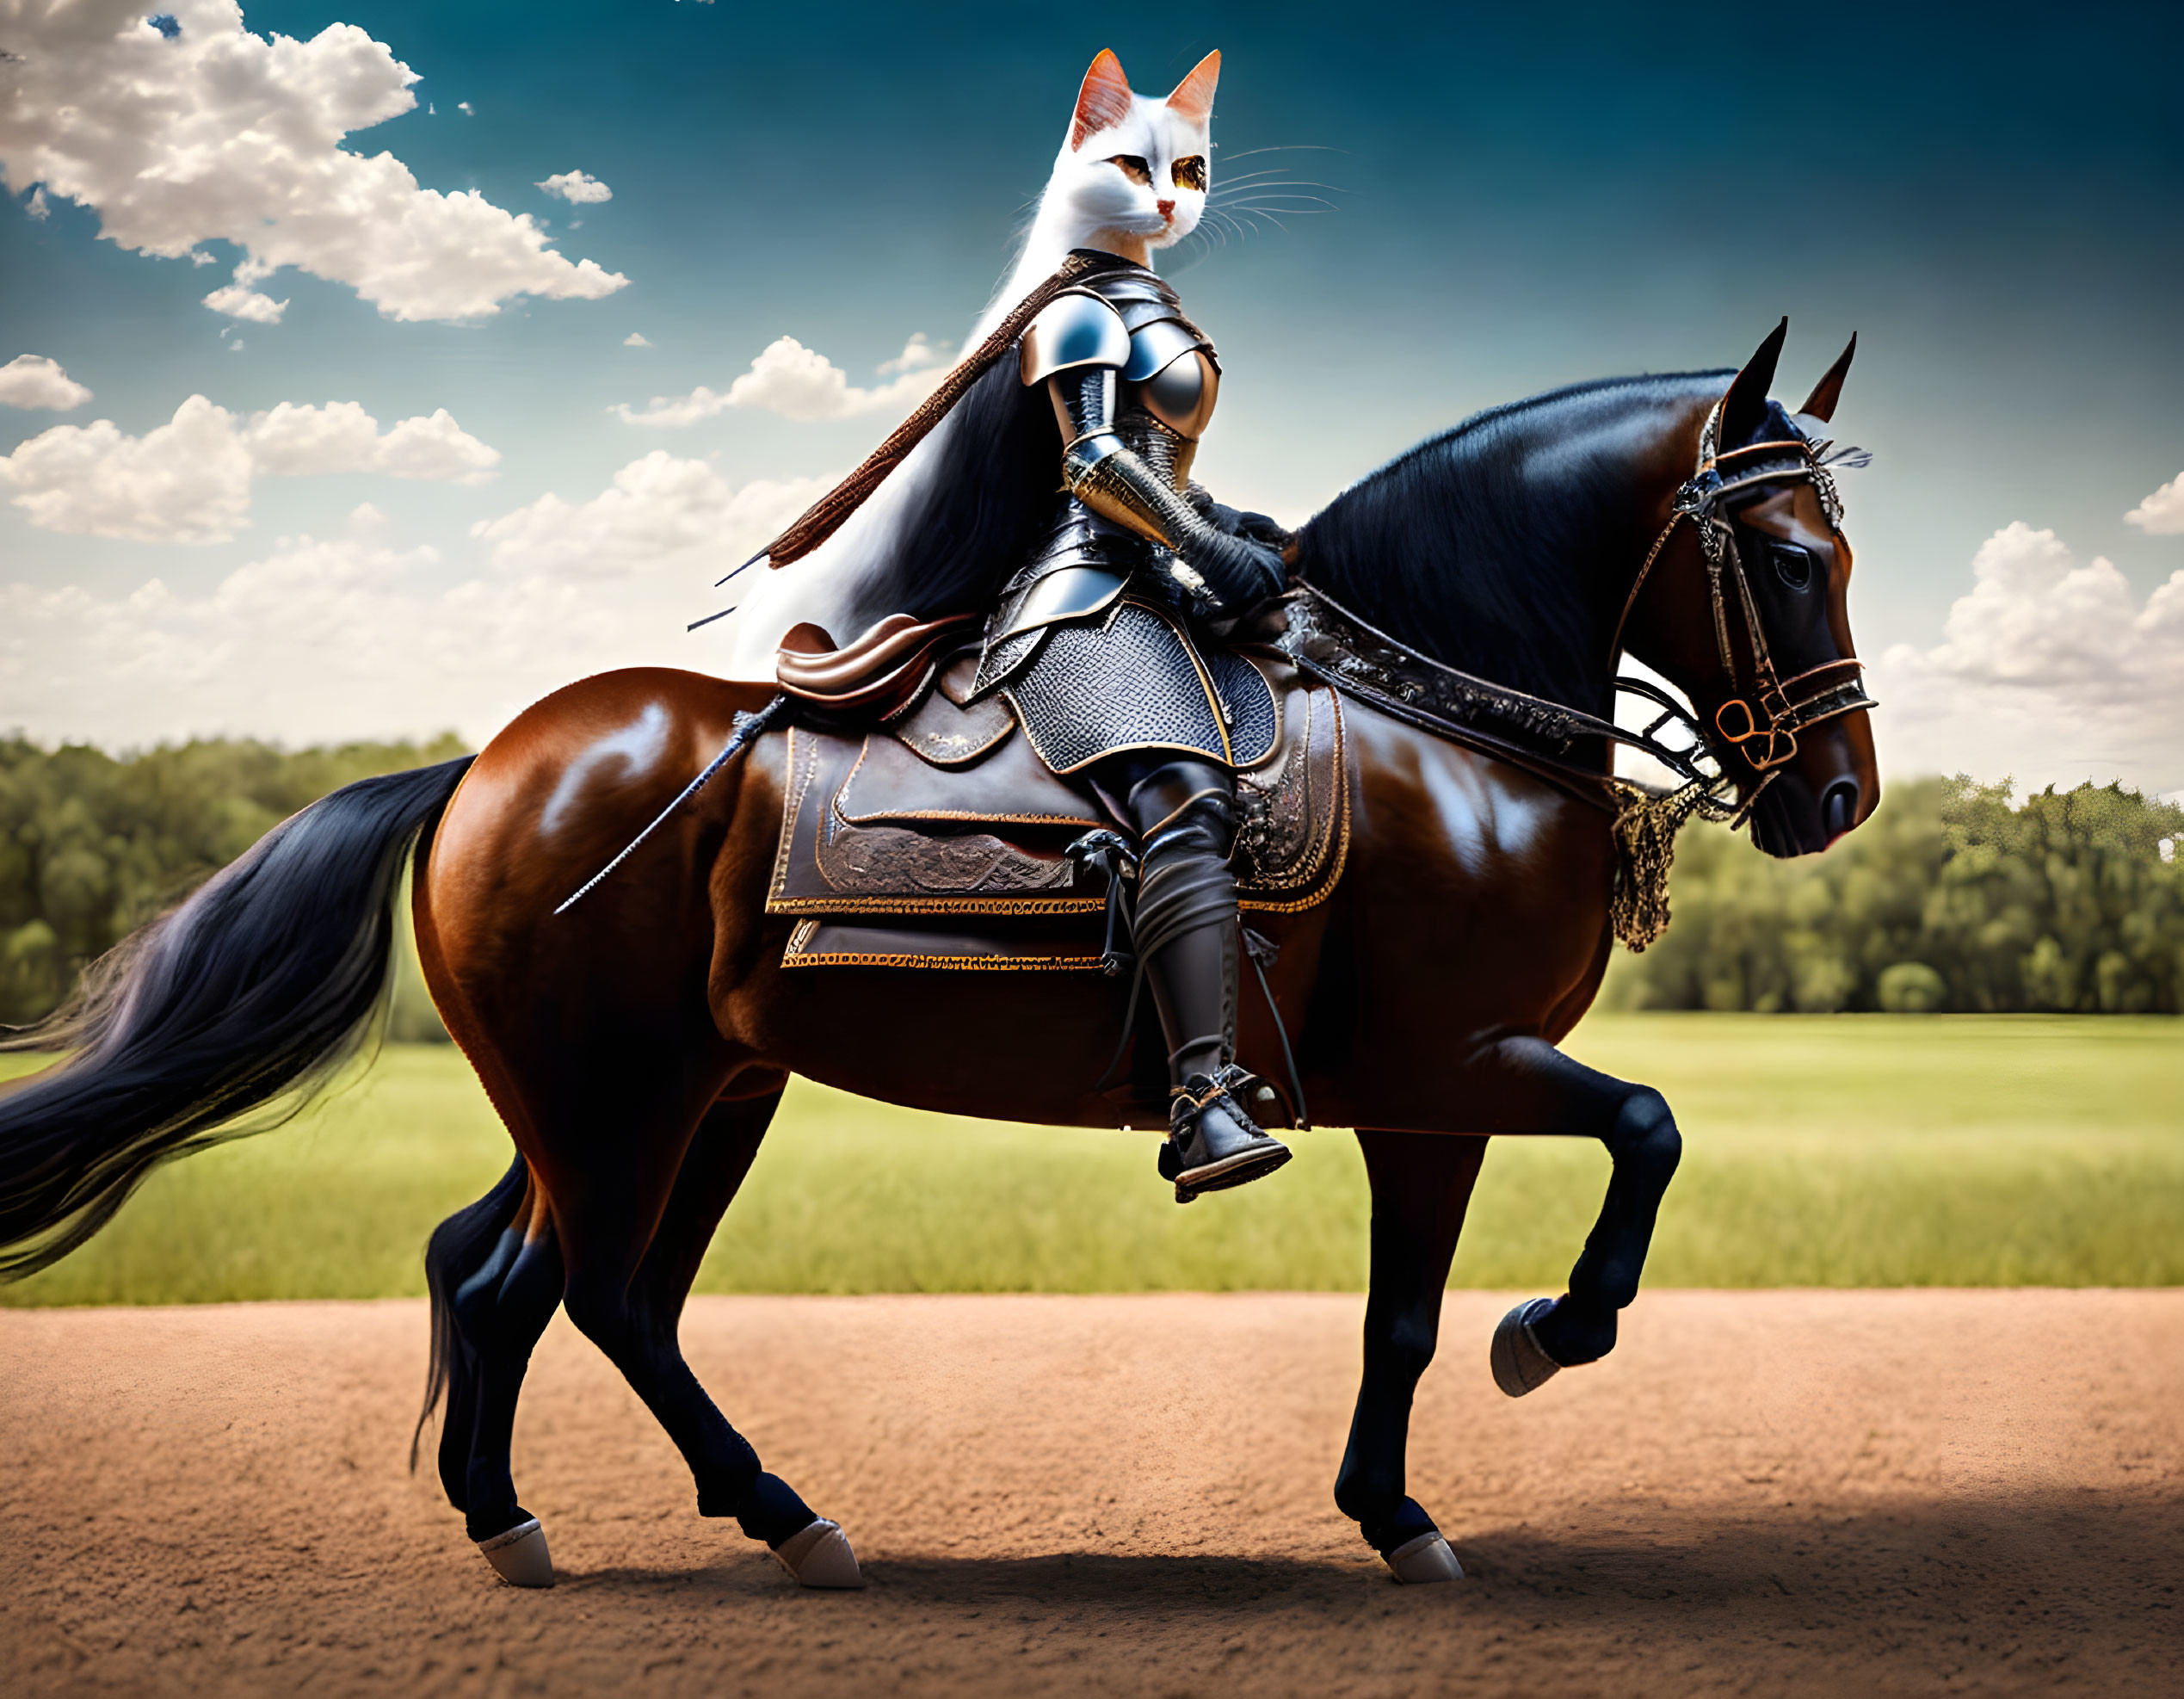 Cat in medieval knight armor on brown horse in lush field.